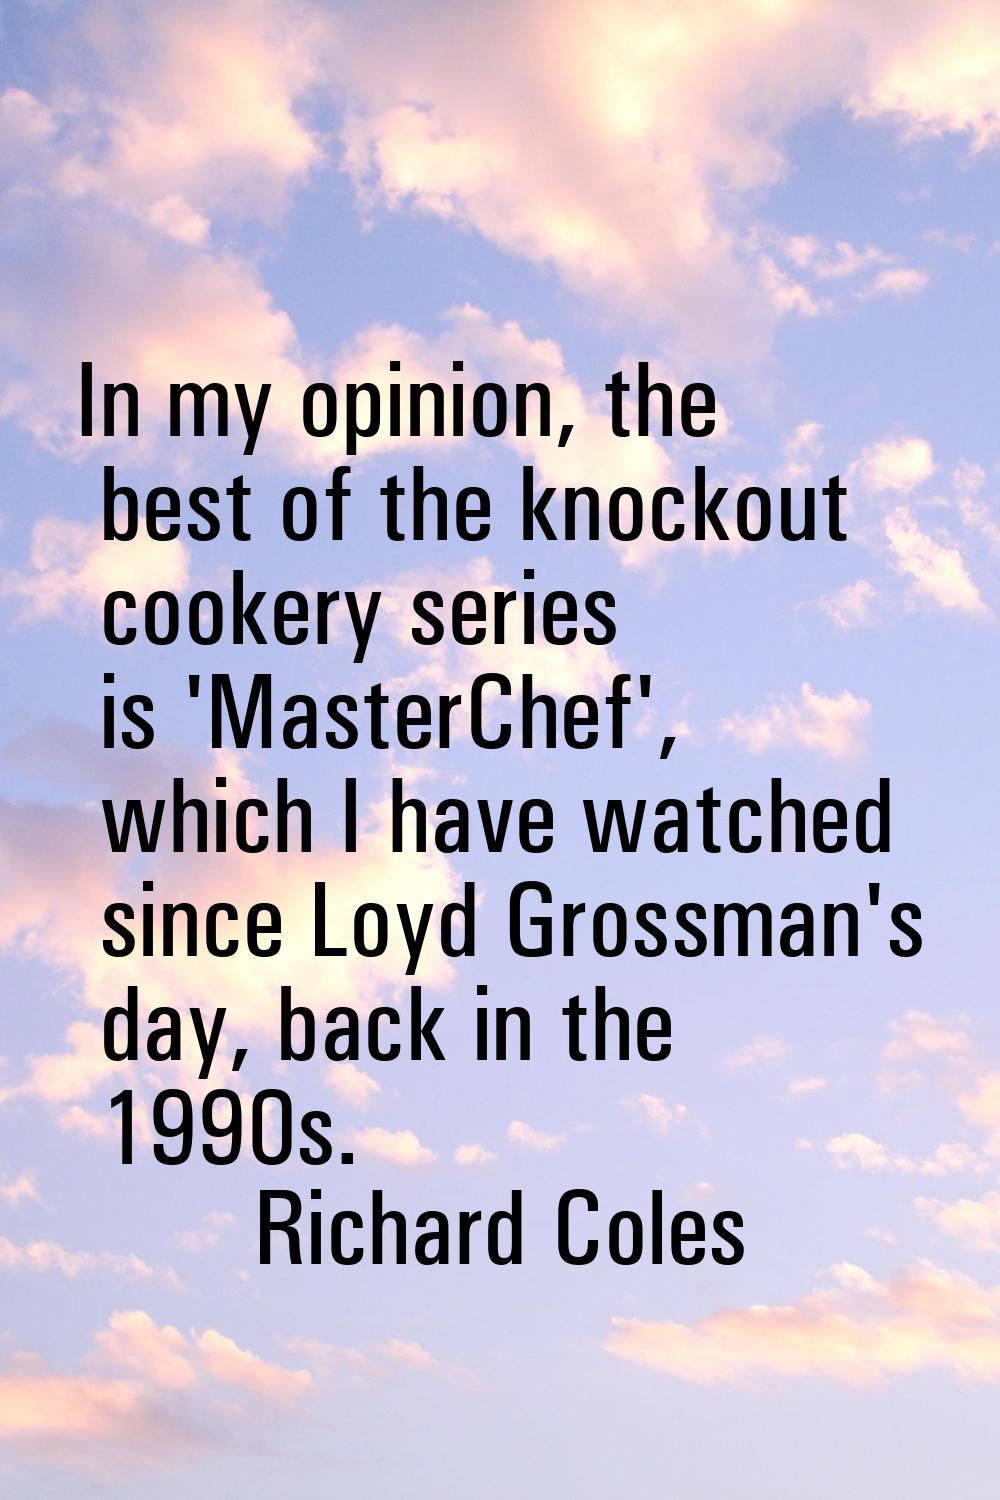 In my opinion, the best of the knockout cookery series is 'MasterChef', which I have watched since 